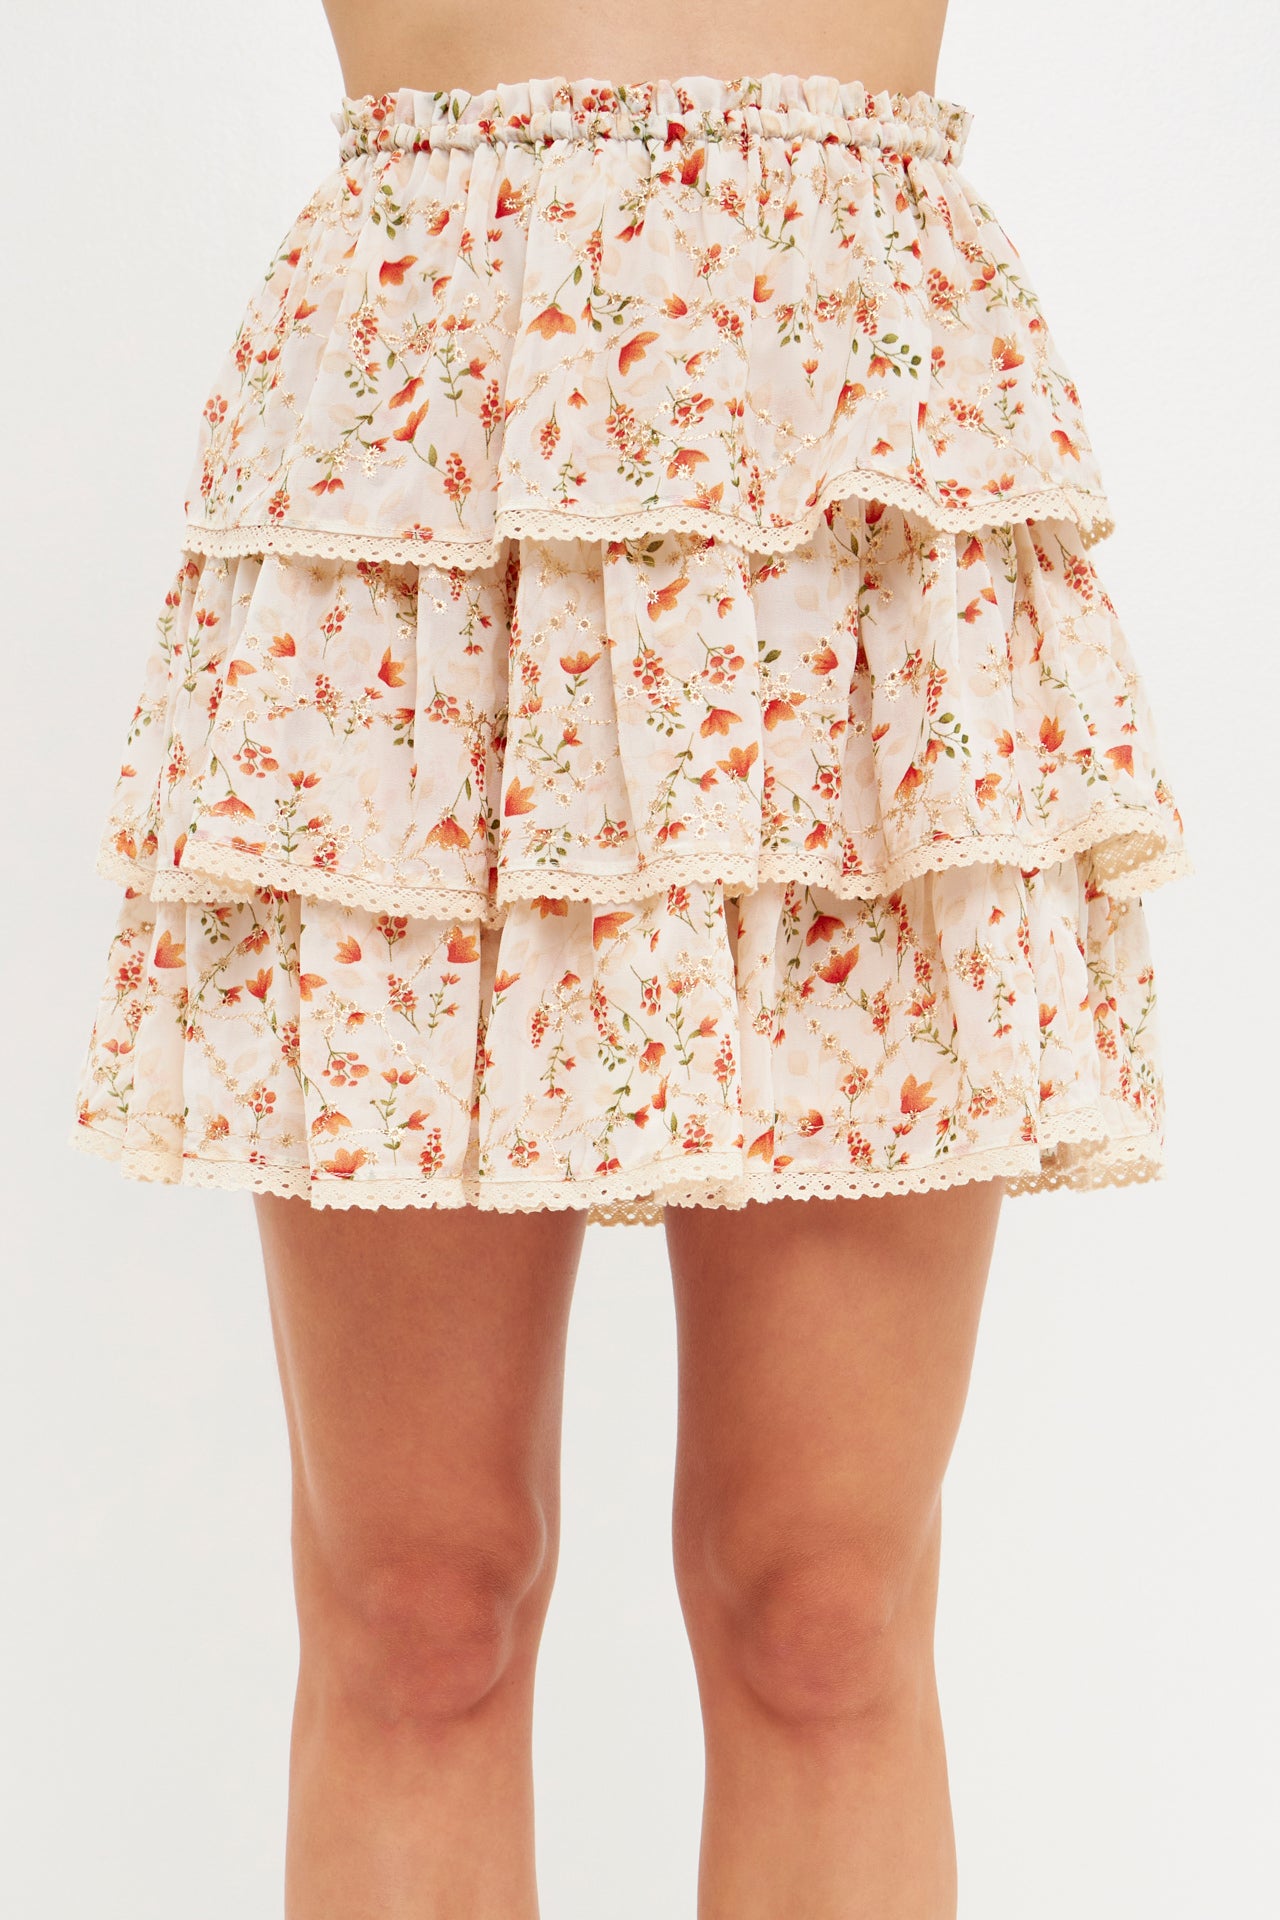 FREE THE ROSES - High Waisted Ruffle Skirt with Lace - SKIRTS available at Objectrare